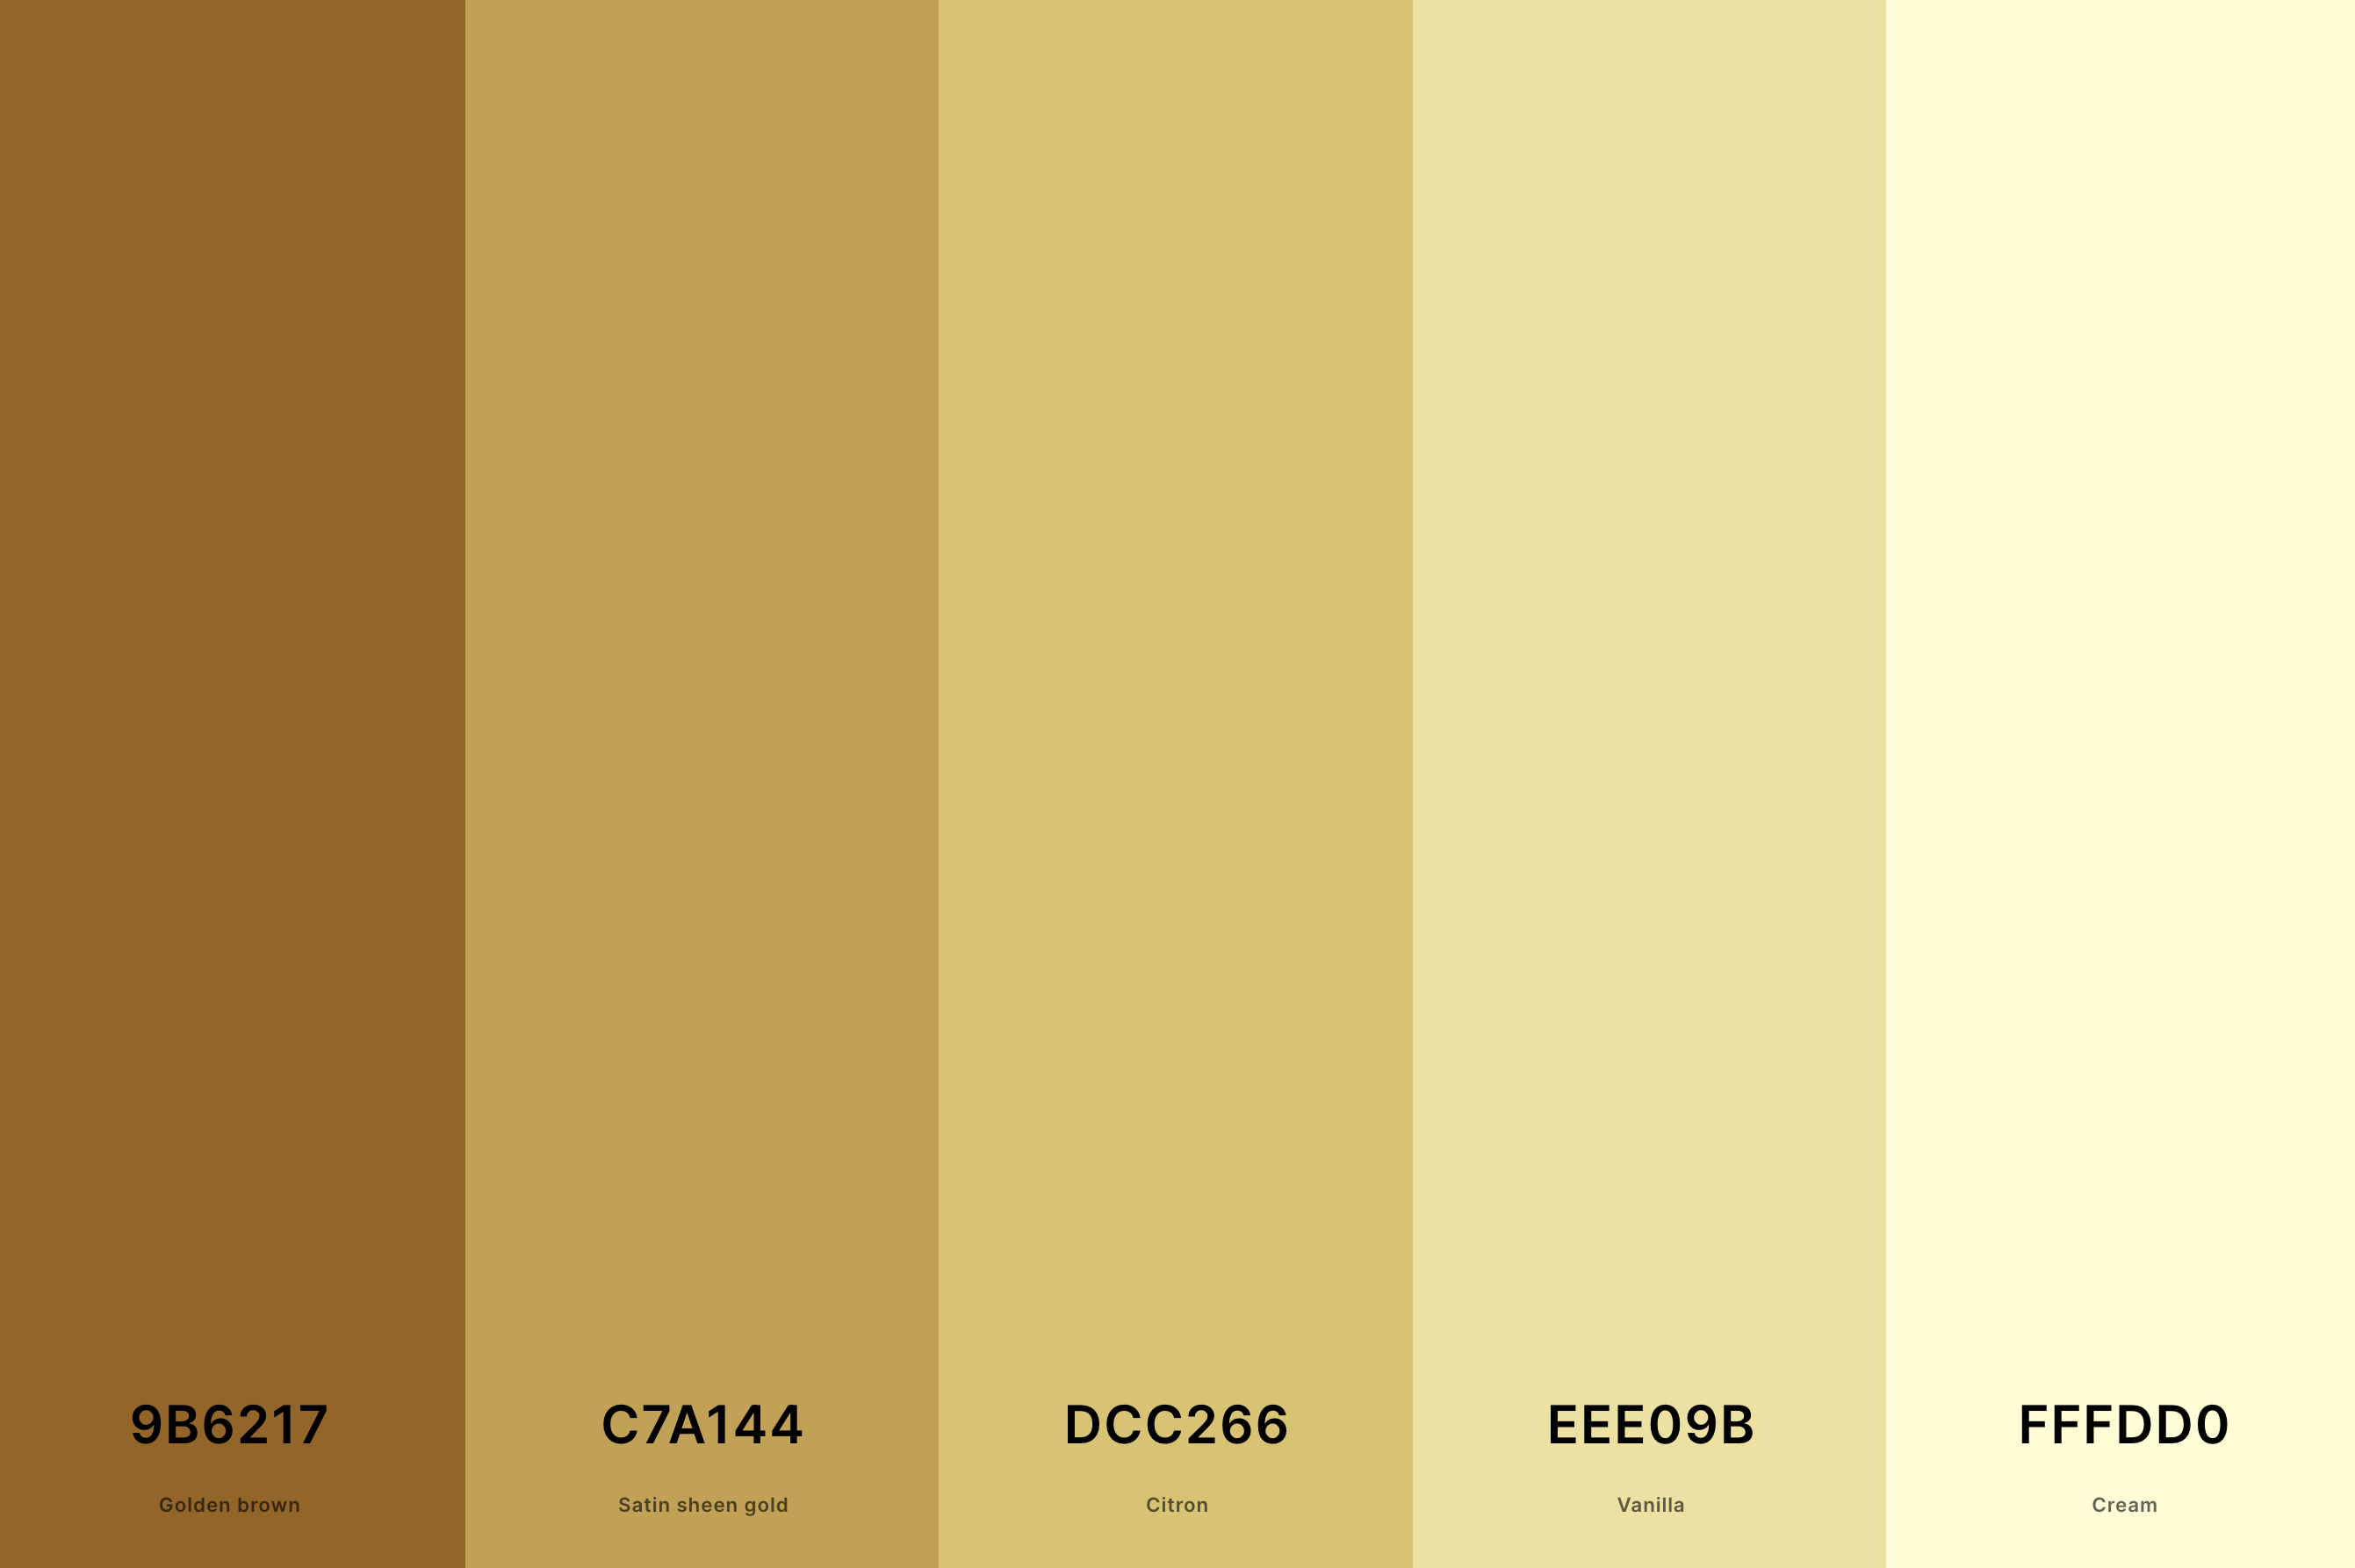 11. Cream And Gold Color Palette Color Palette with Golden Brown (Hex #9B6217) + Satin Sheen Gold (Hex #C7A144) + Citron (Hex #DCC266) + Vanilla (Hex #EEE09B) + Cream (Hex #FFFDD0) Color Palette with Hex Codes